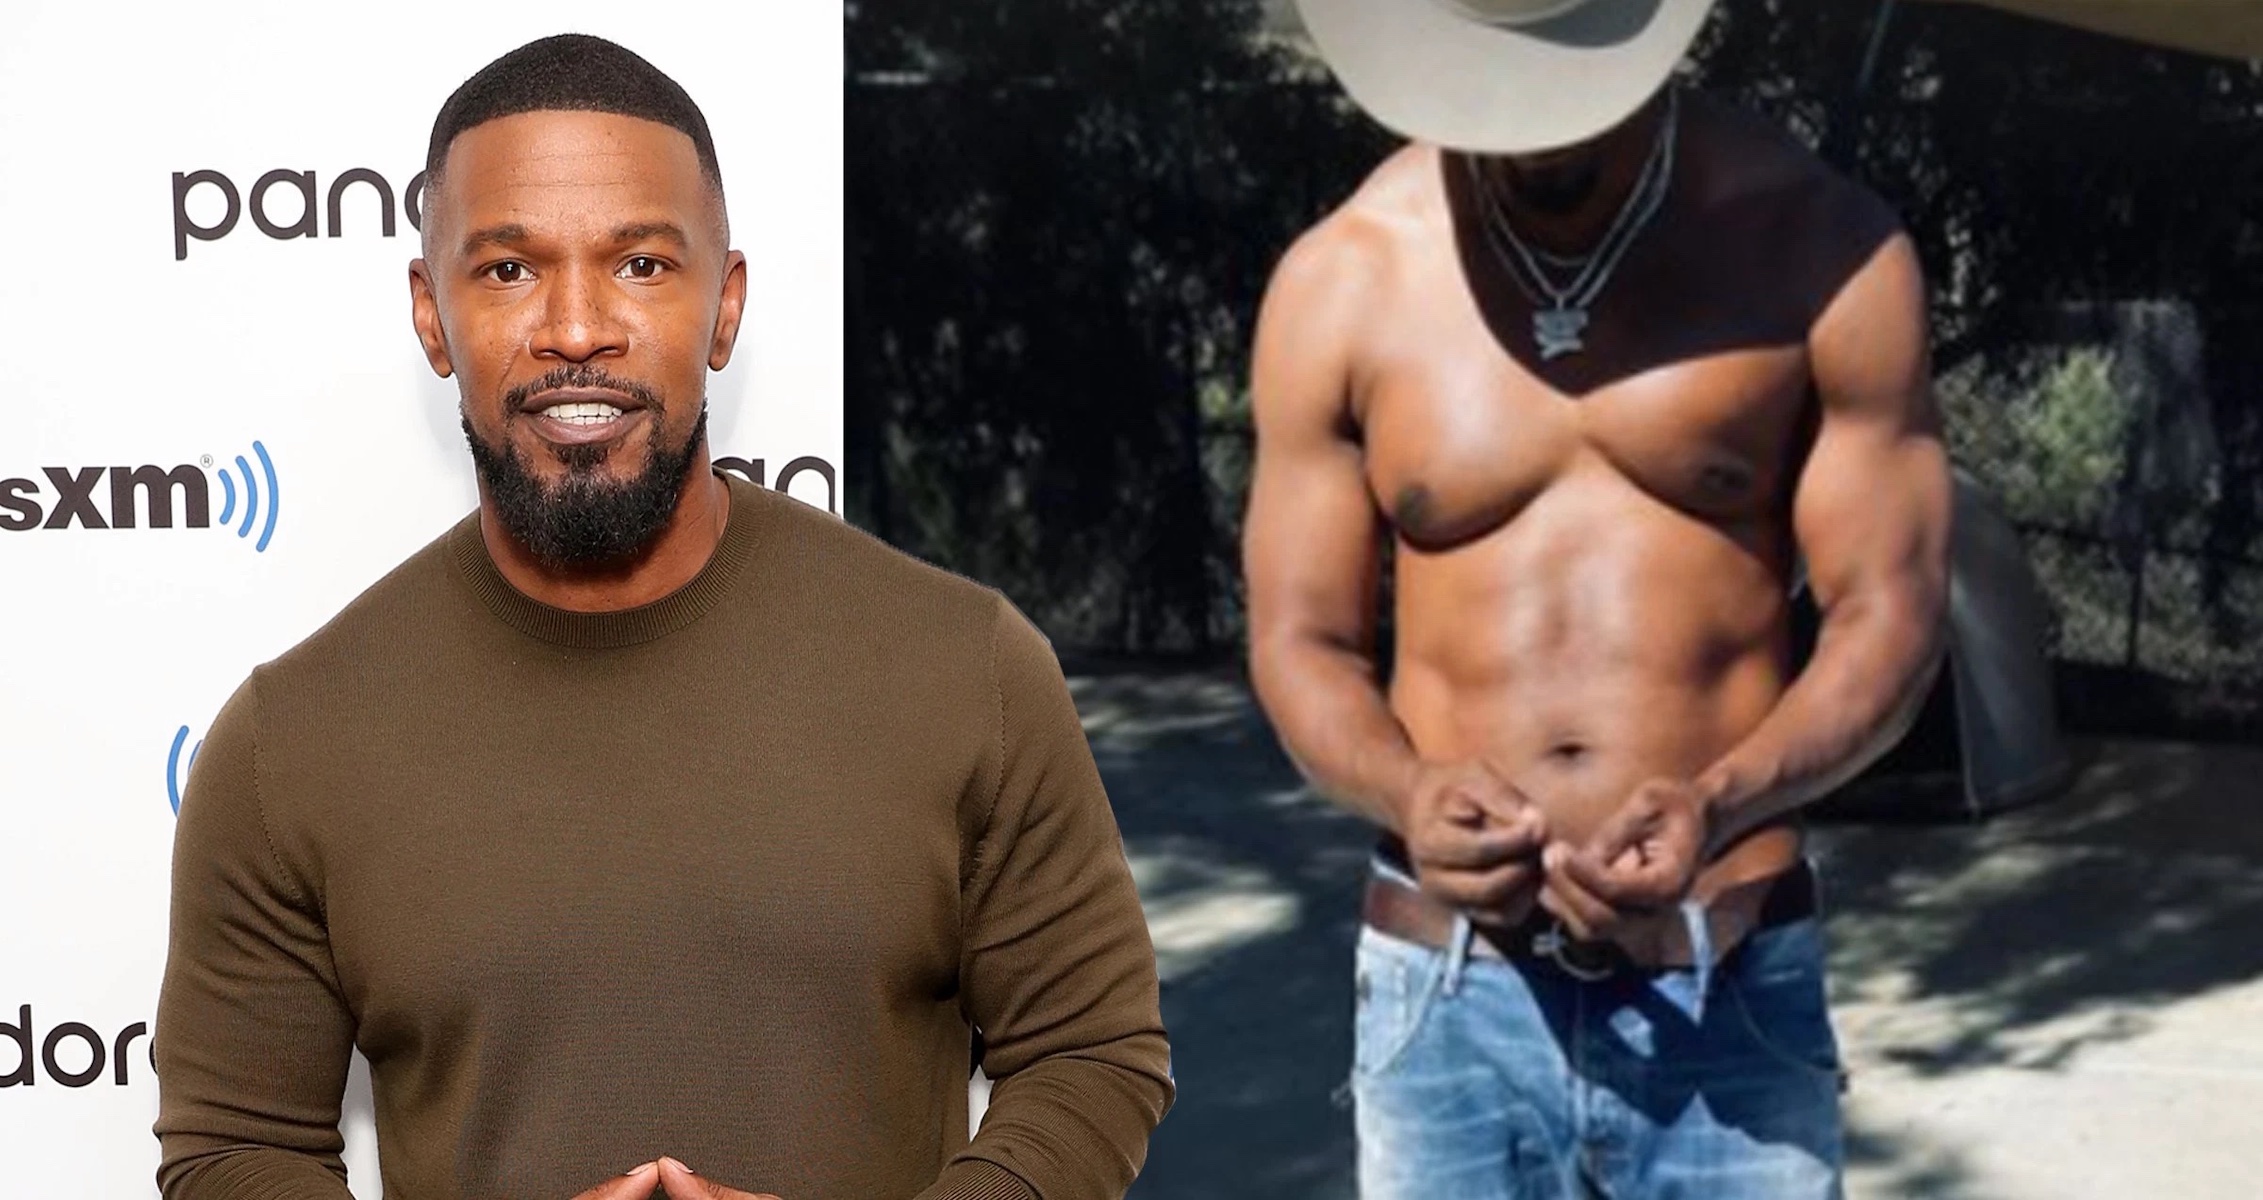 Jamie Foxx Does Not Have Trainer, Uses Bodyweight Exercises To Stay In Shape